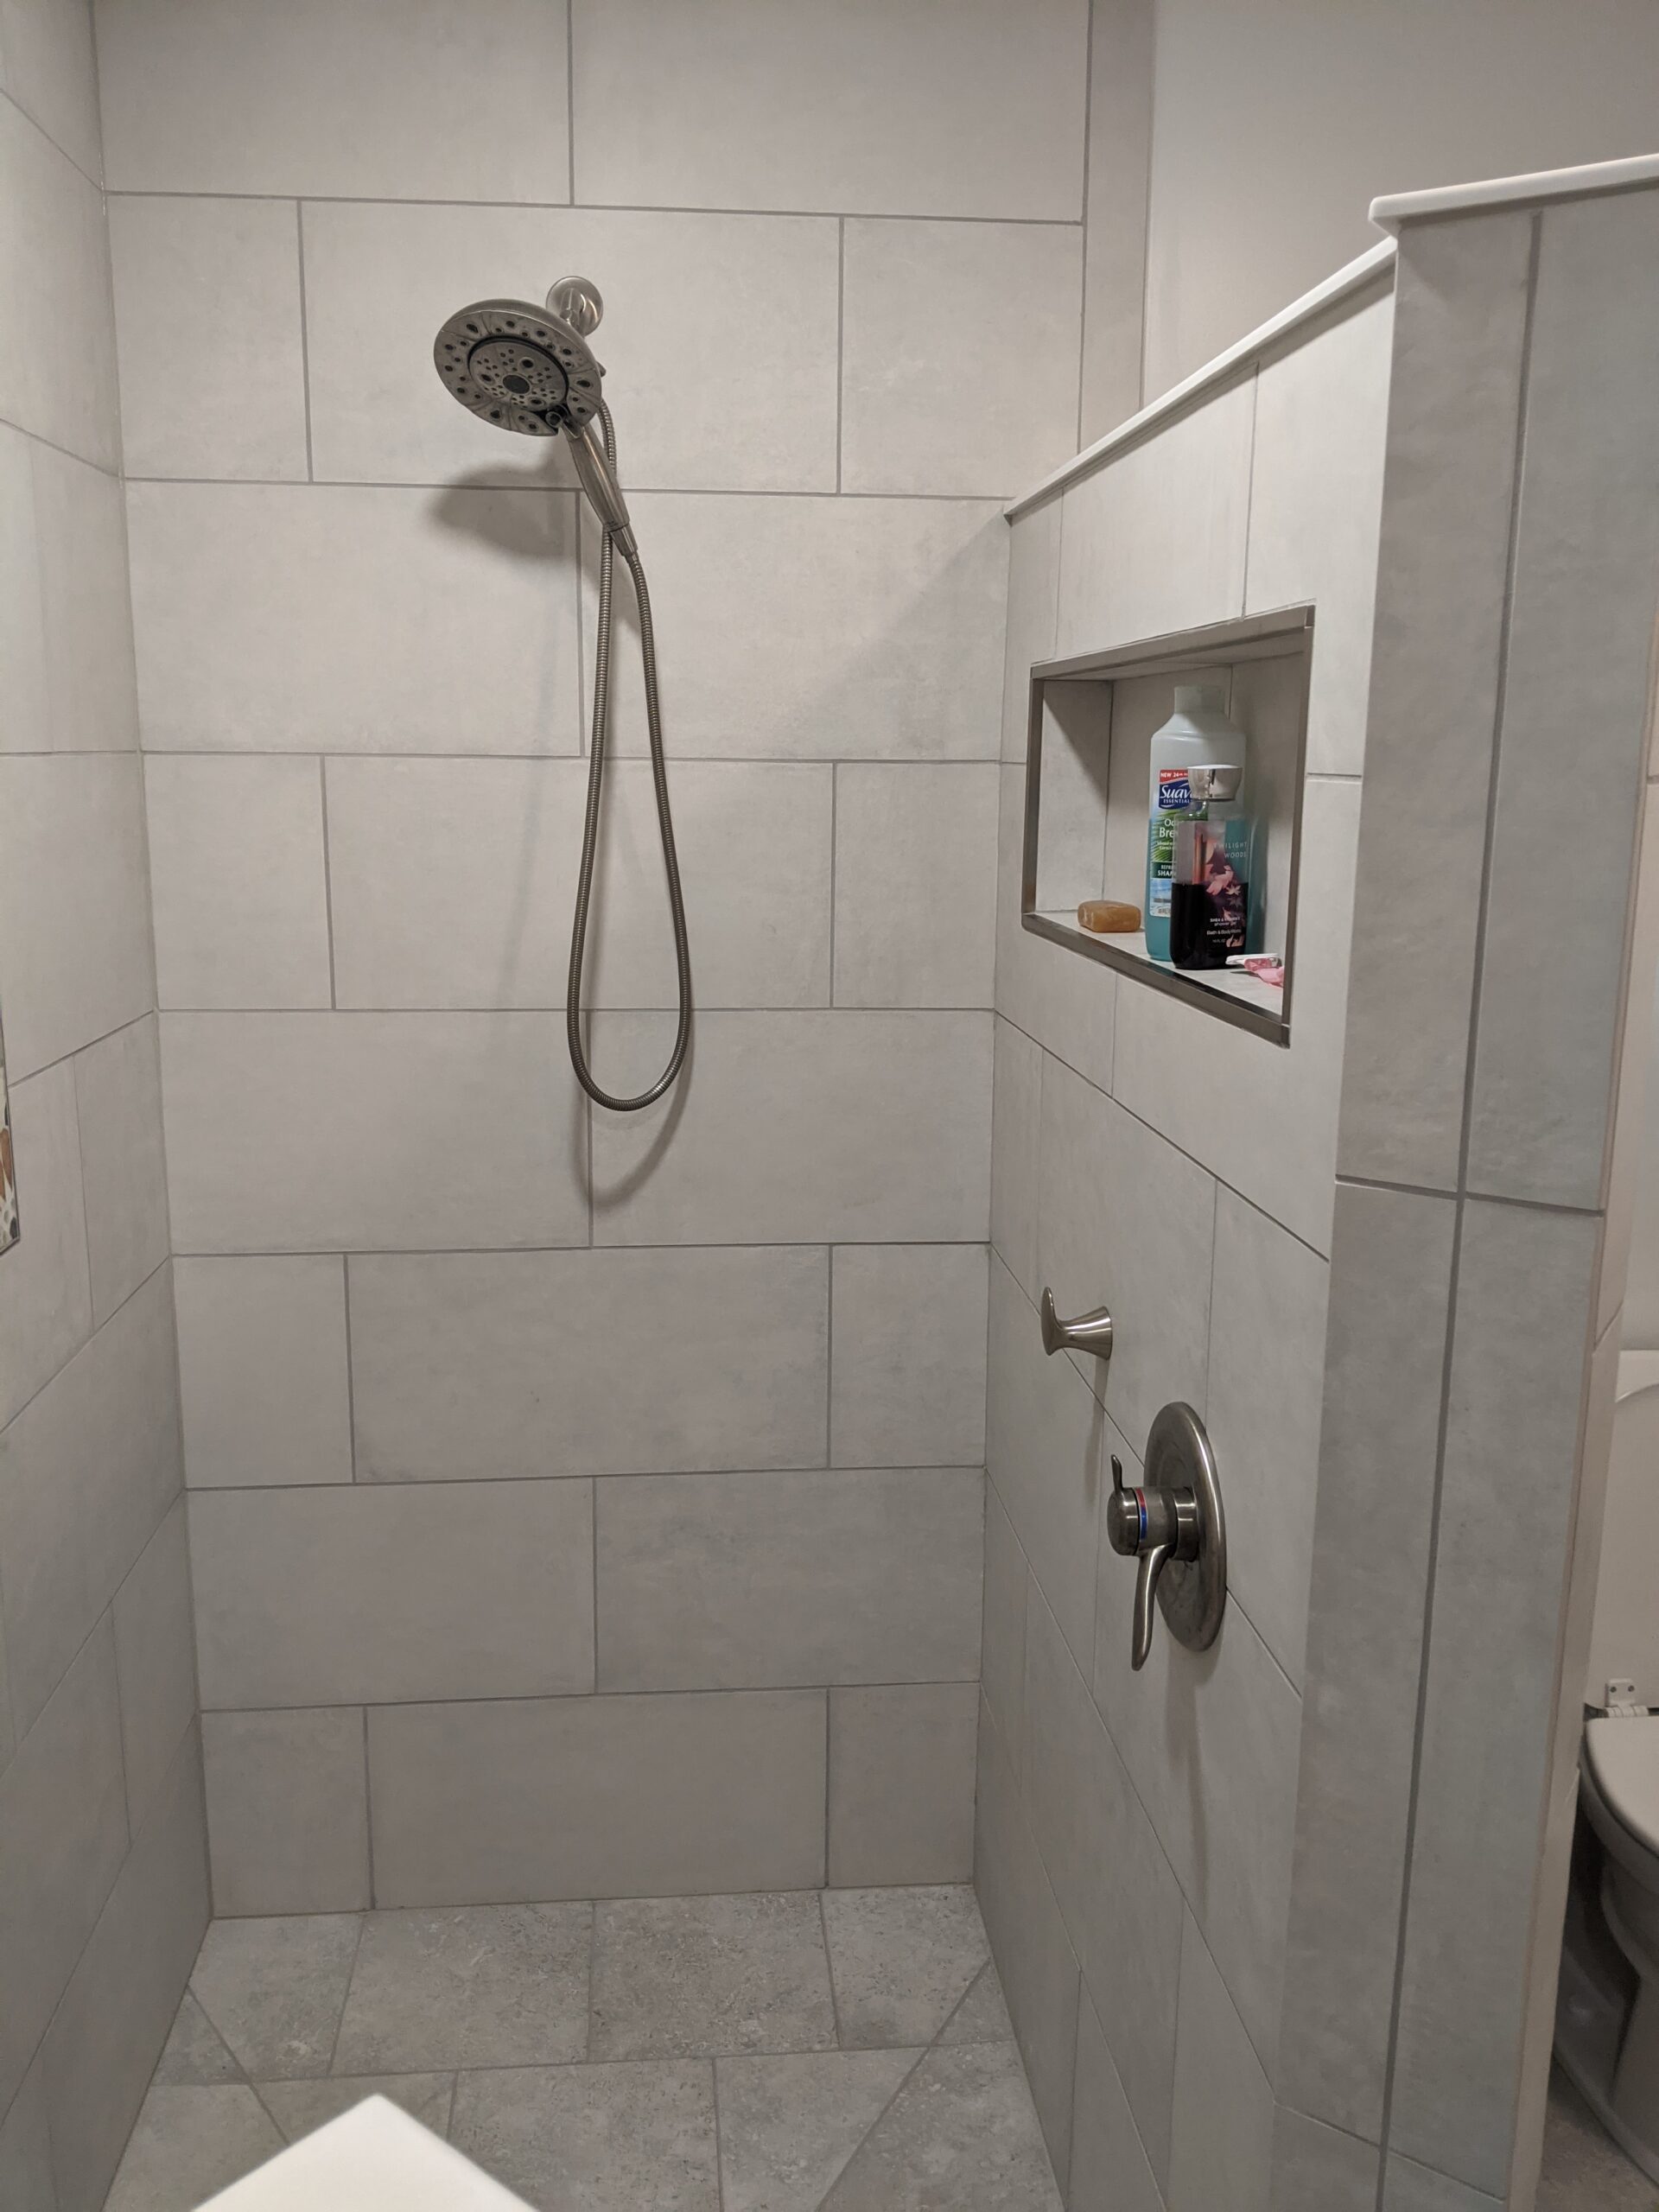 The tiled shower has a custom niche to hold all the shower items